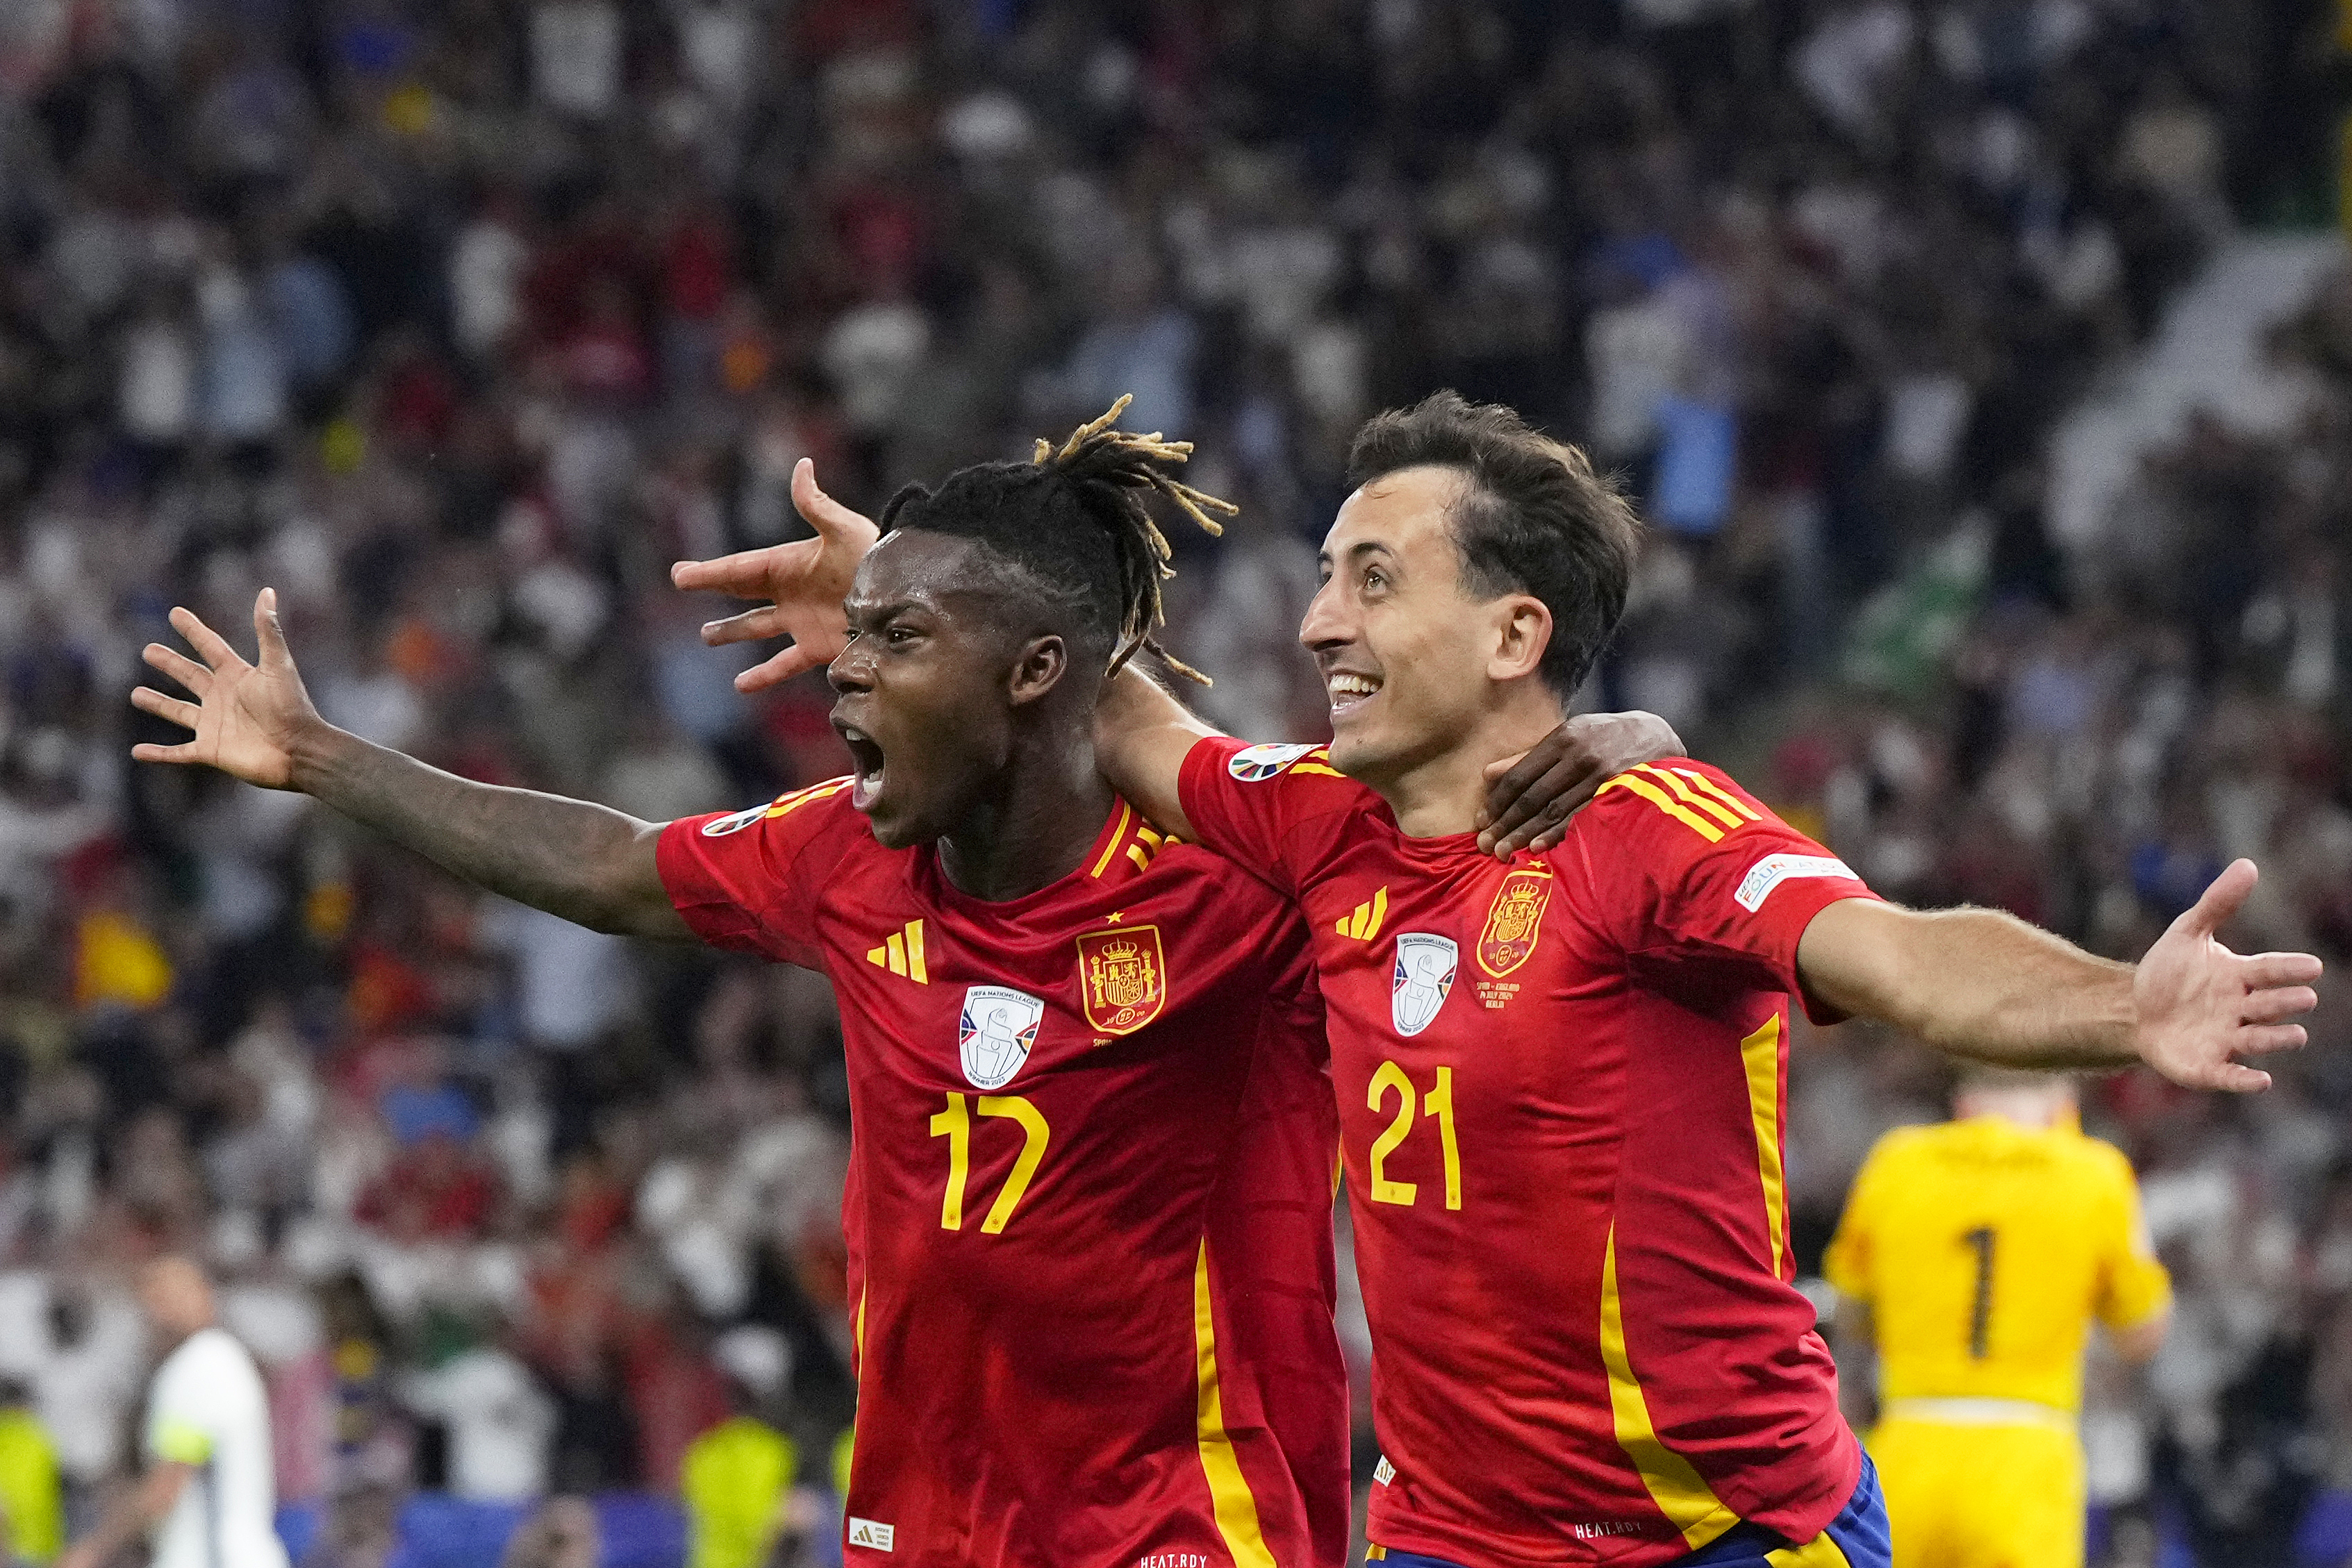 Spain's Mikel Oyarzabal (R) celebrates with Nico Williams after scoring their team's second goal during the UEFA Euro 2024 final between Spain and England in Berlin, Germany, July 14, 2024. /CFP